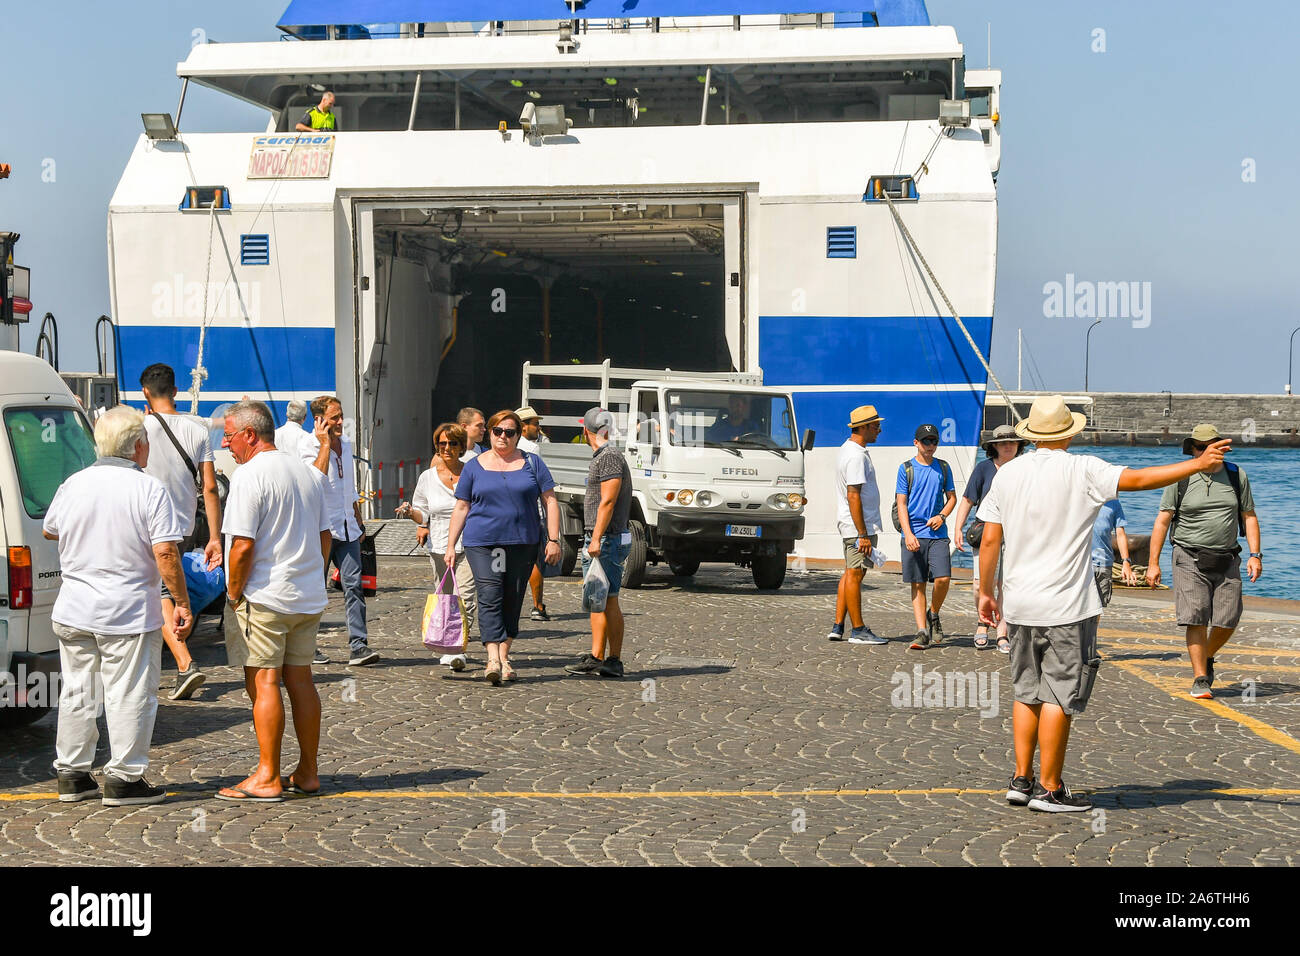 ISLE OF CAPRI, ITALY - AUGUST 2019: People and a vehicle disembarking a ferry in the port on the Isle of Capri. Stock Photo